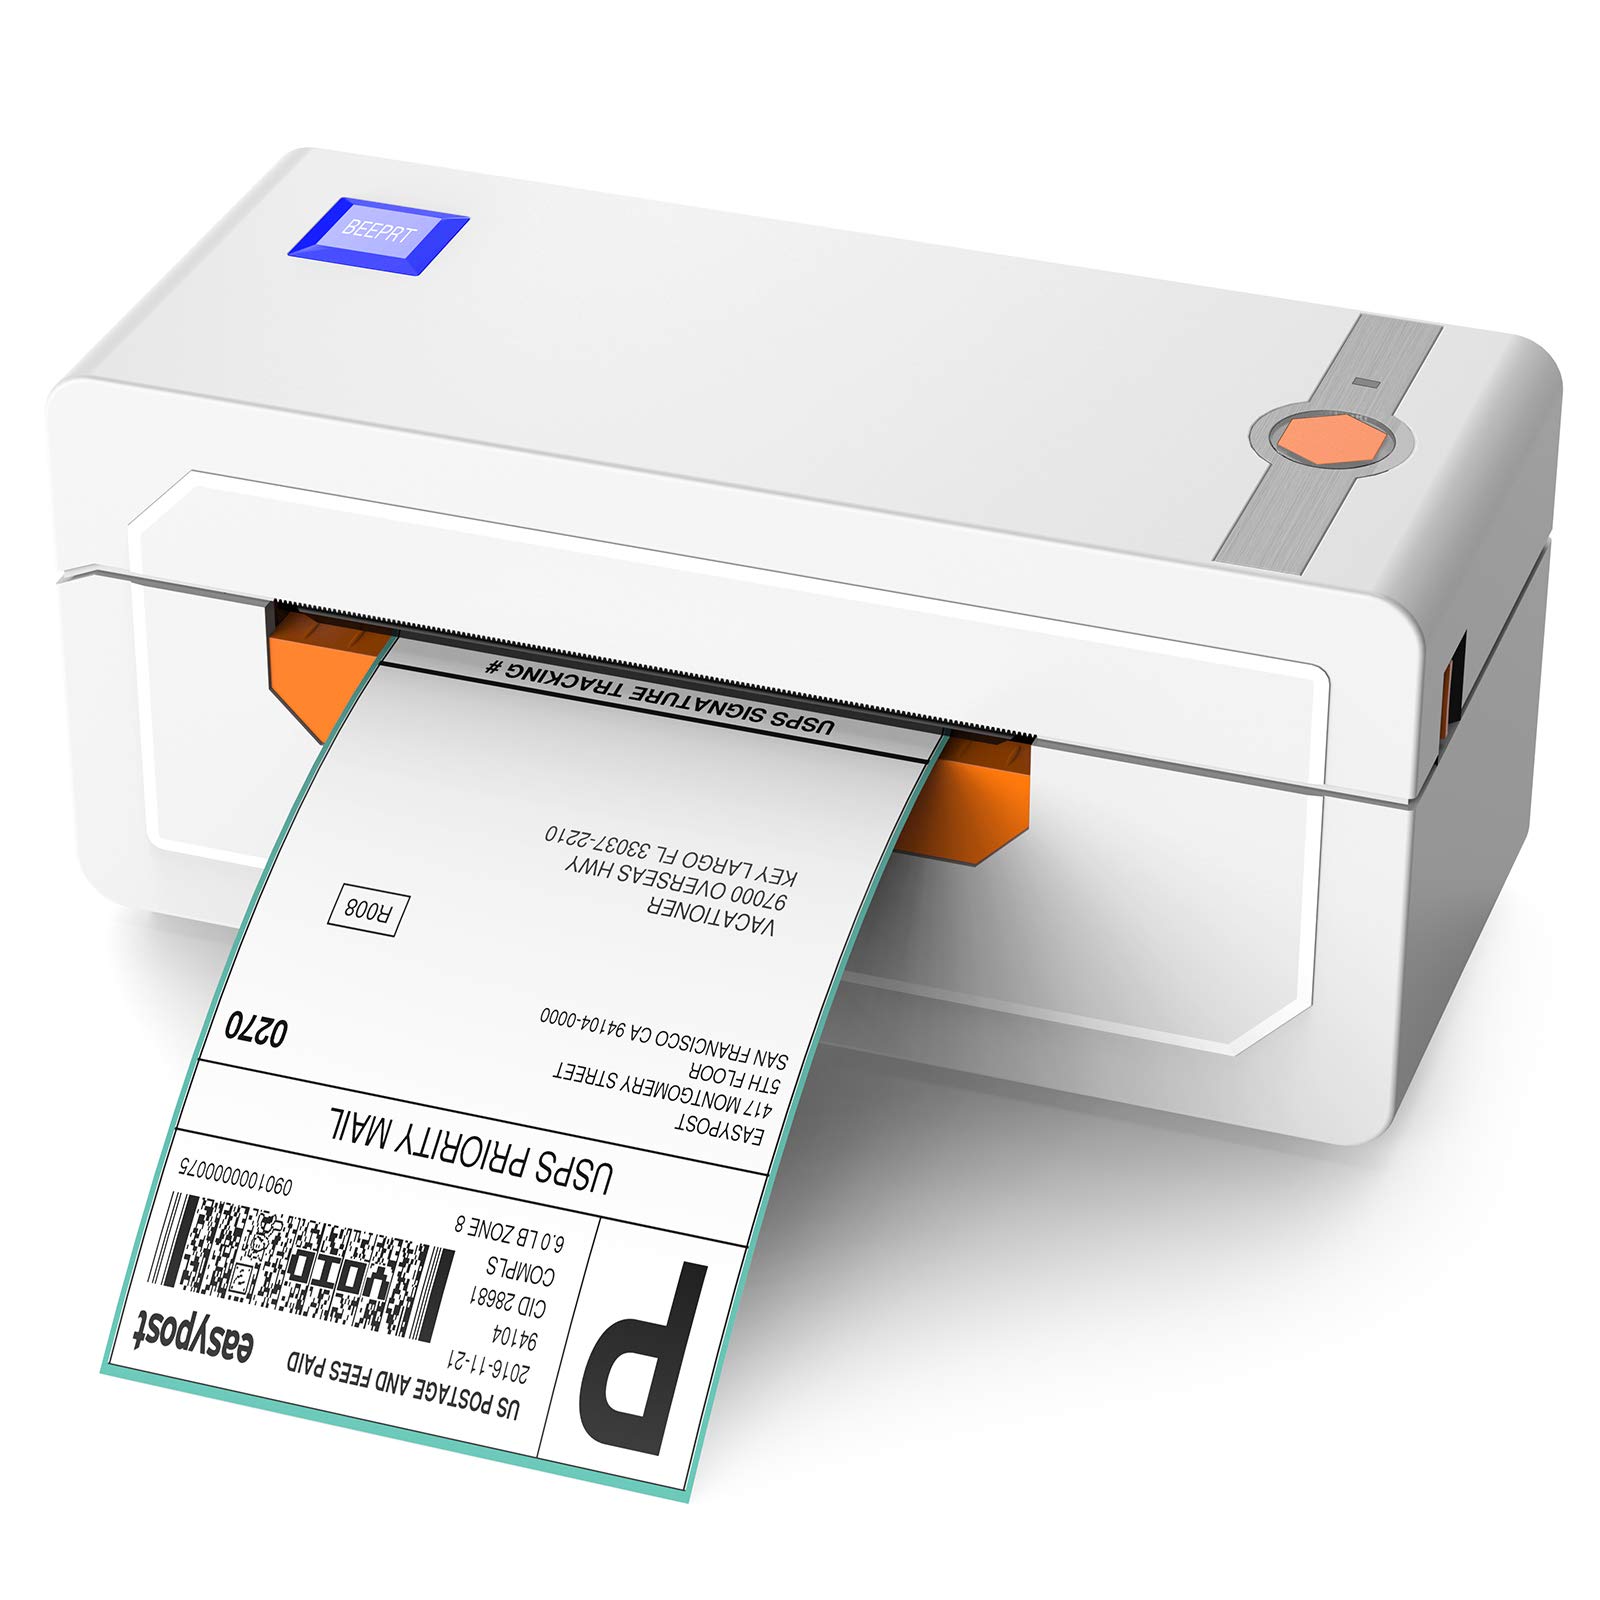 Alfuheim Thermal Shipping Label Printer 4x6 - High Speed Printing at 150mm/s -Barcode Printer for Shipping Compatible with UPS WorldShip,Etsy,Ebay,...